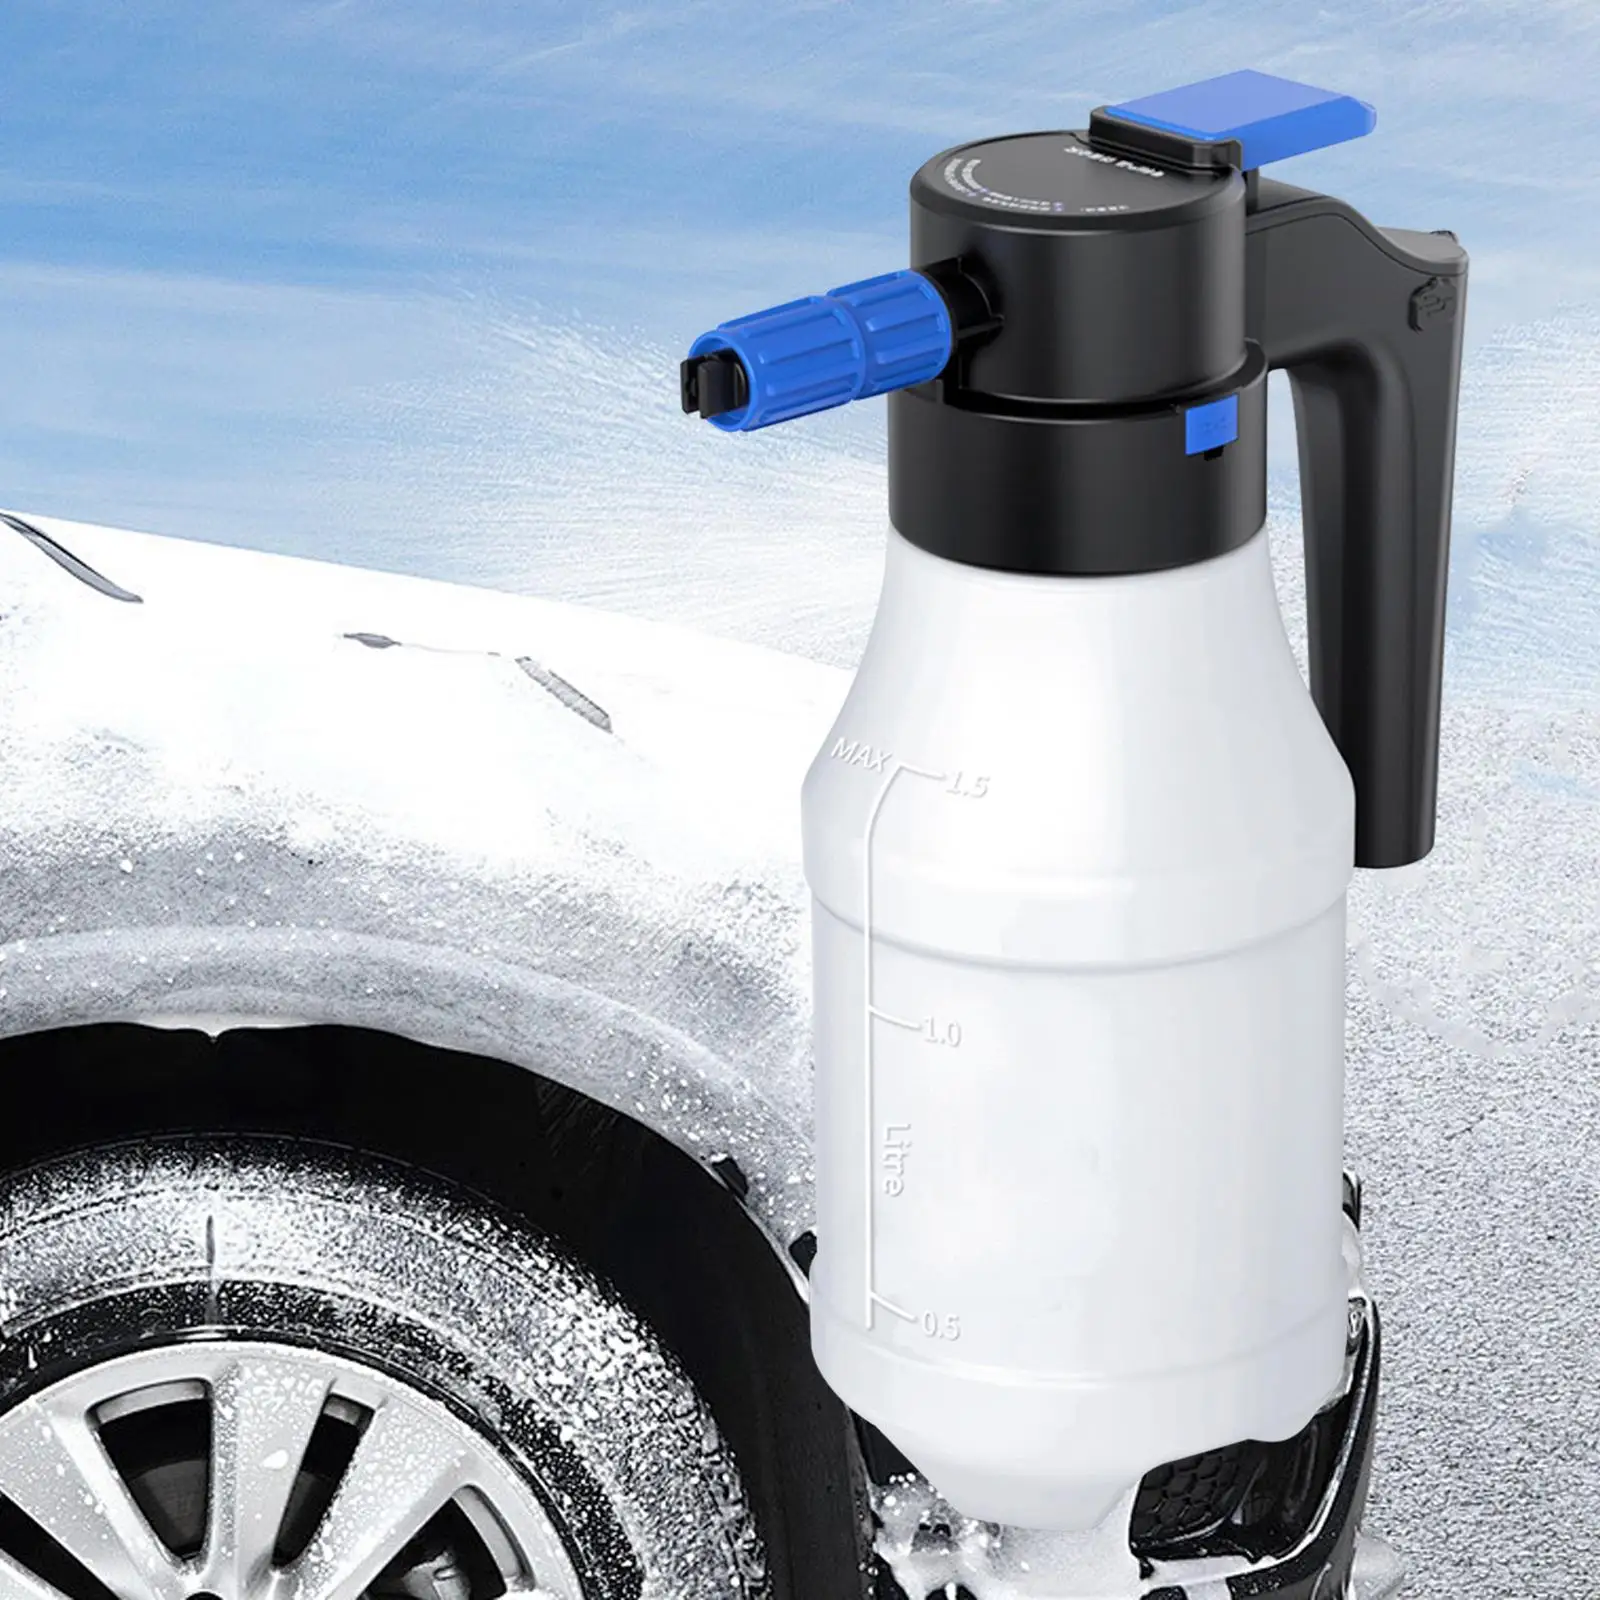 

1.5L Electric Foam Sprayer Car Washing Accessory Water Sprayer Plant Mister Professional Watering Can for Bathroom Cleaning